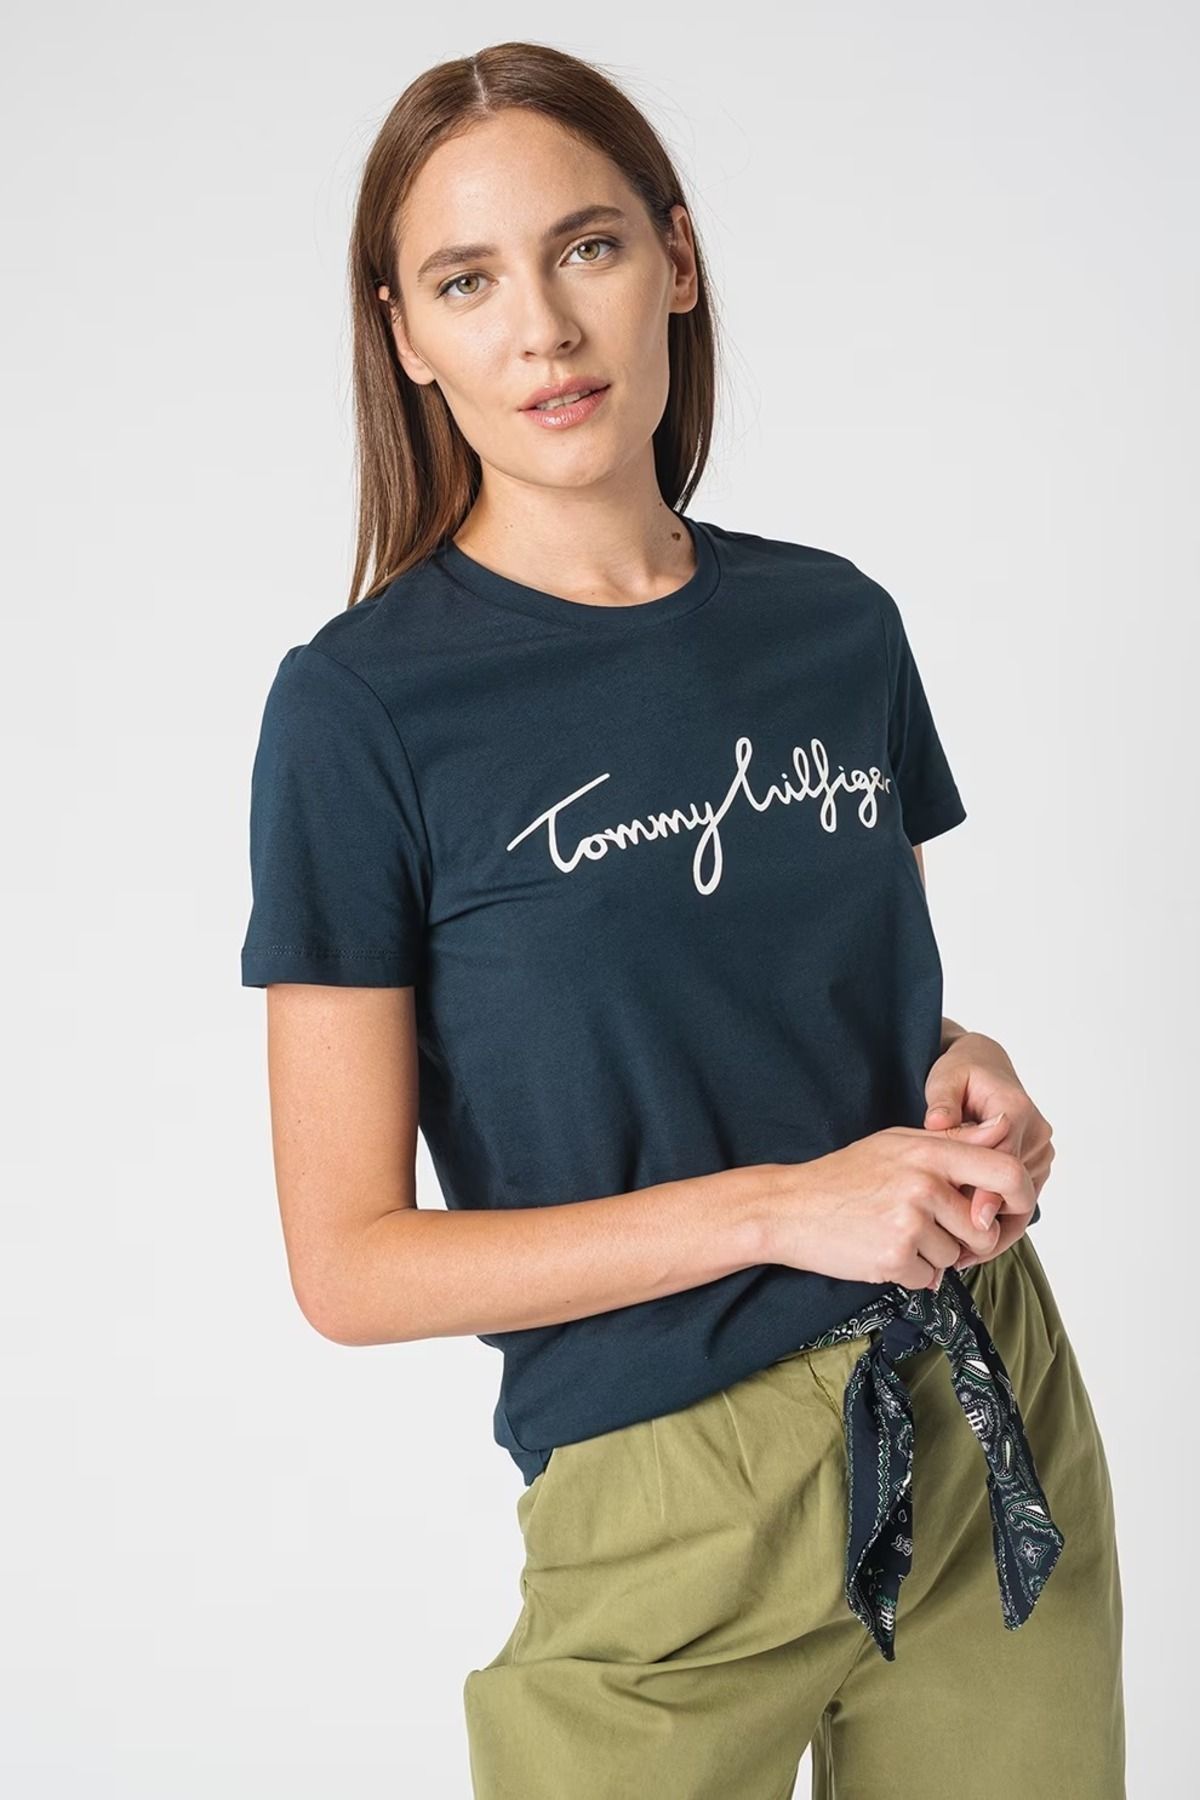 Tommy Hilfiger CREW NECK GRAPHIC TEE T-SHIRT